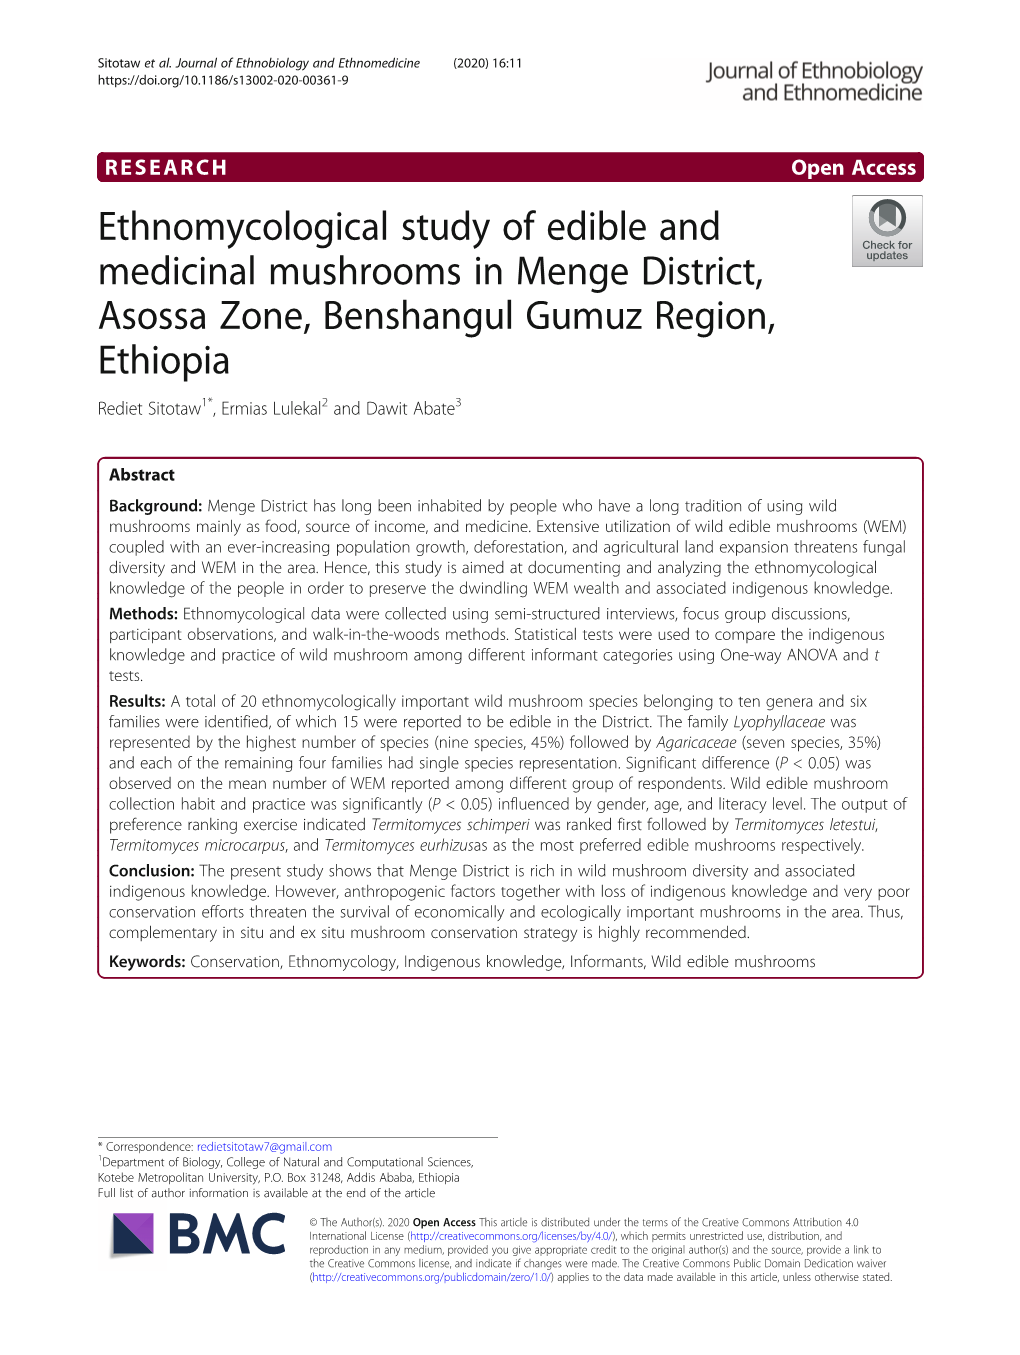 Ethnomycological Study of Edible and Medicinal Mushrooms in Menge